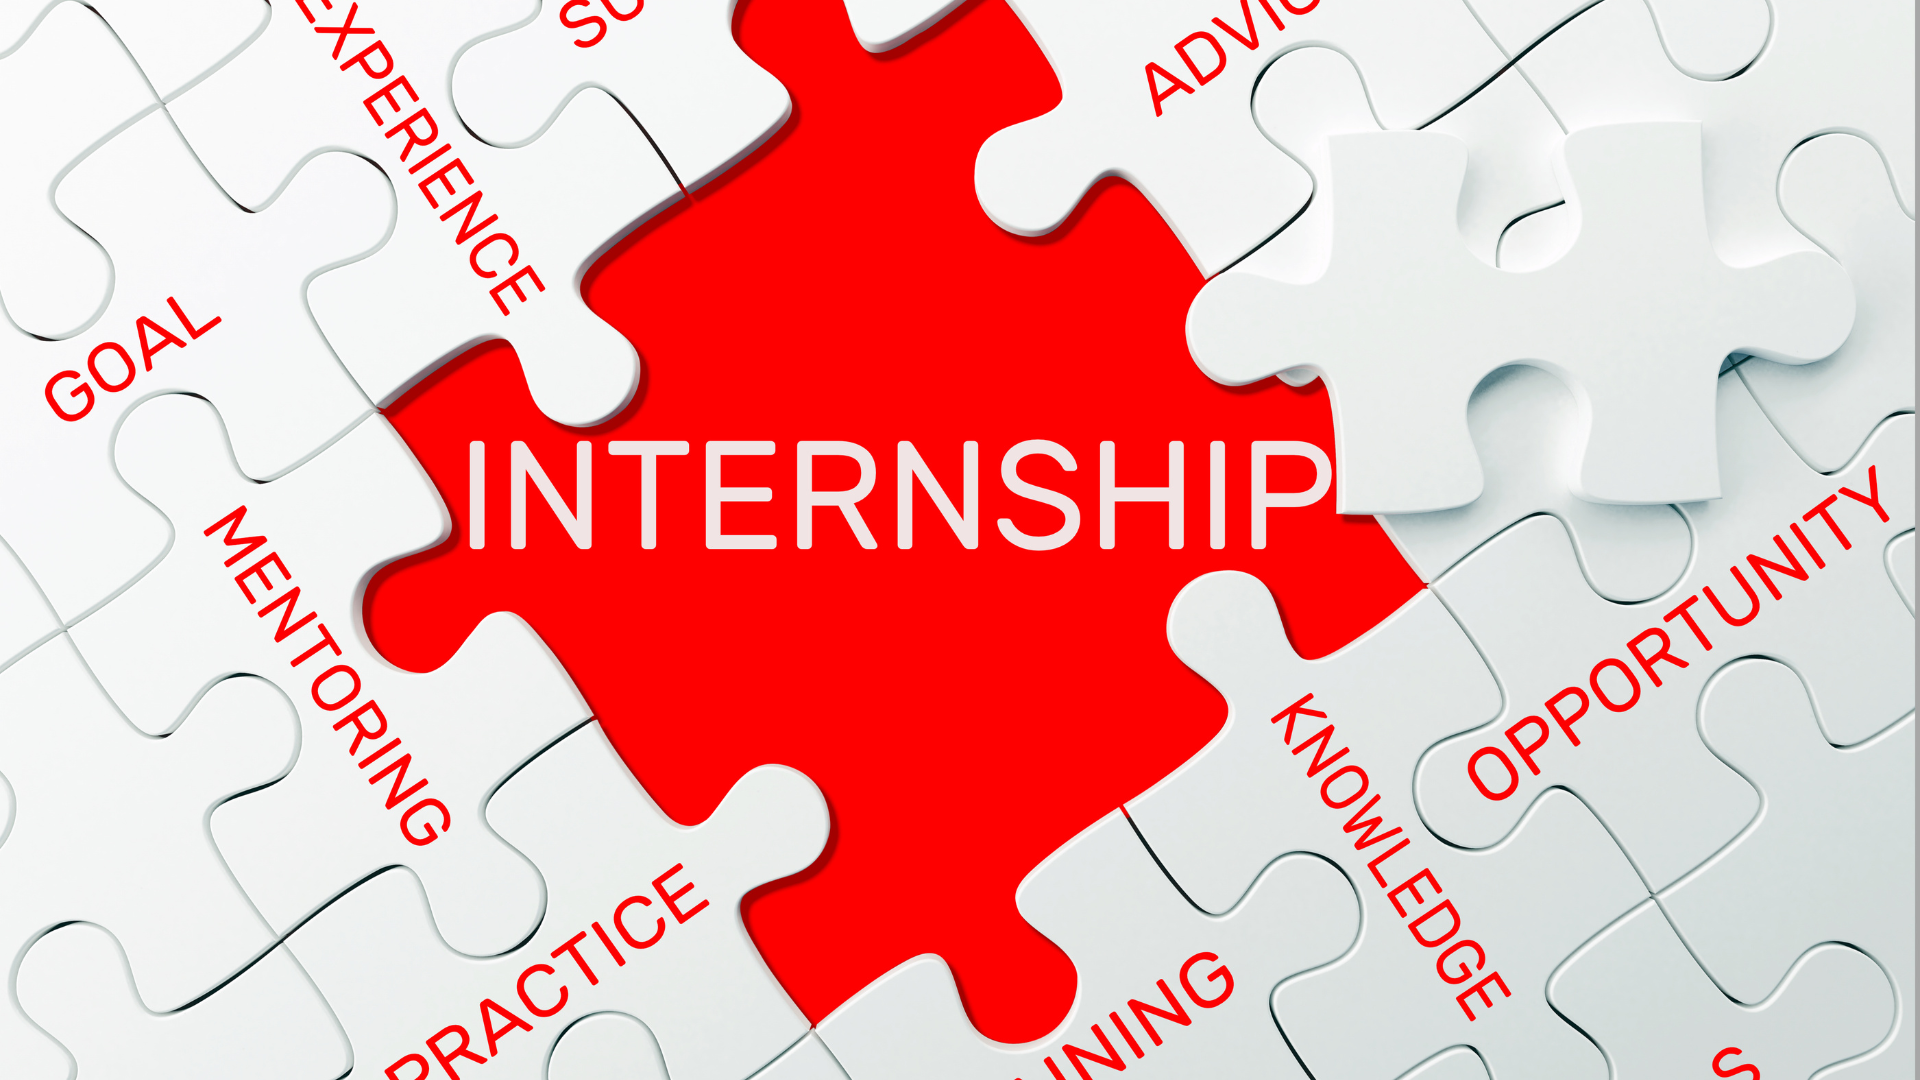 What Is the Purpose of An Internship?